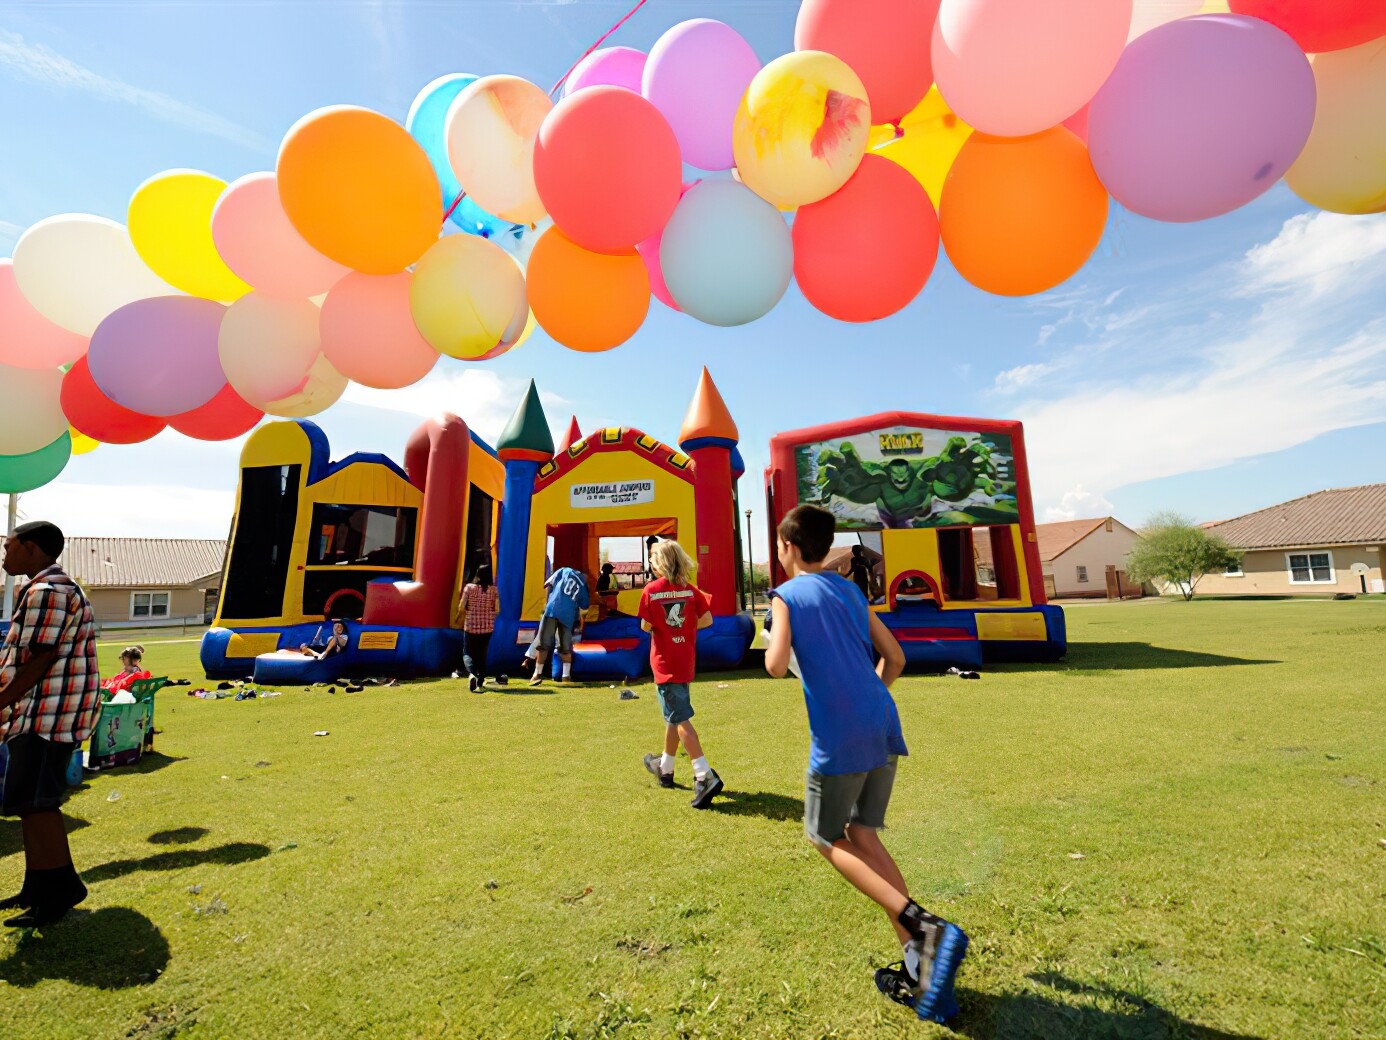 Kids running under balloons to three inflatable bounce houses at a block party on a sunny day.